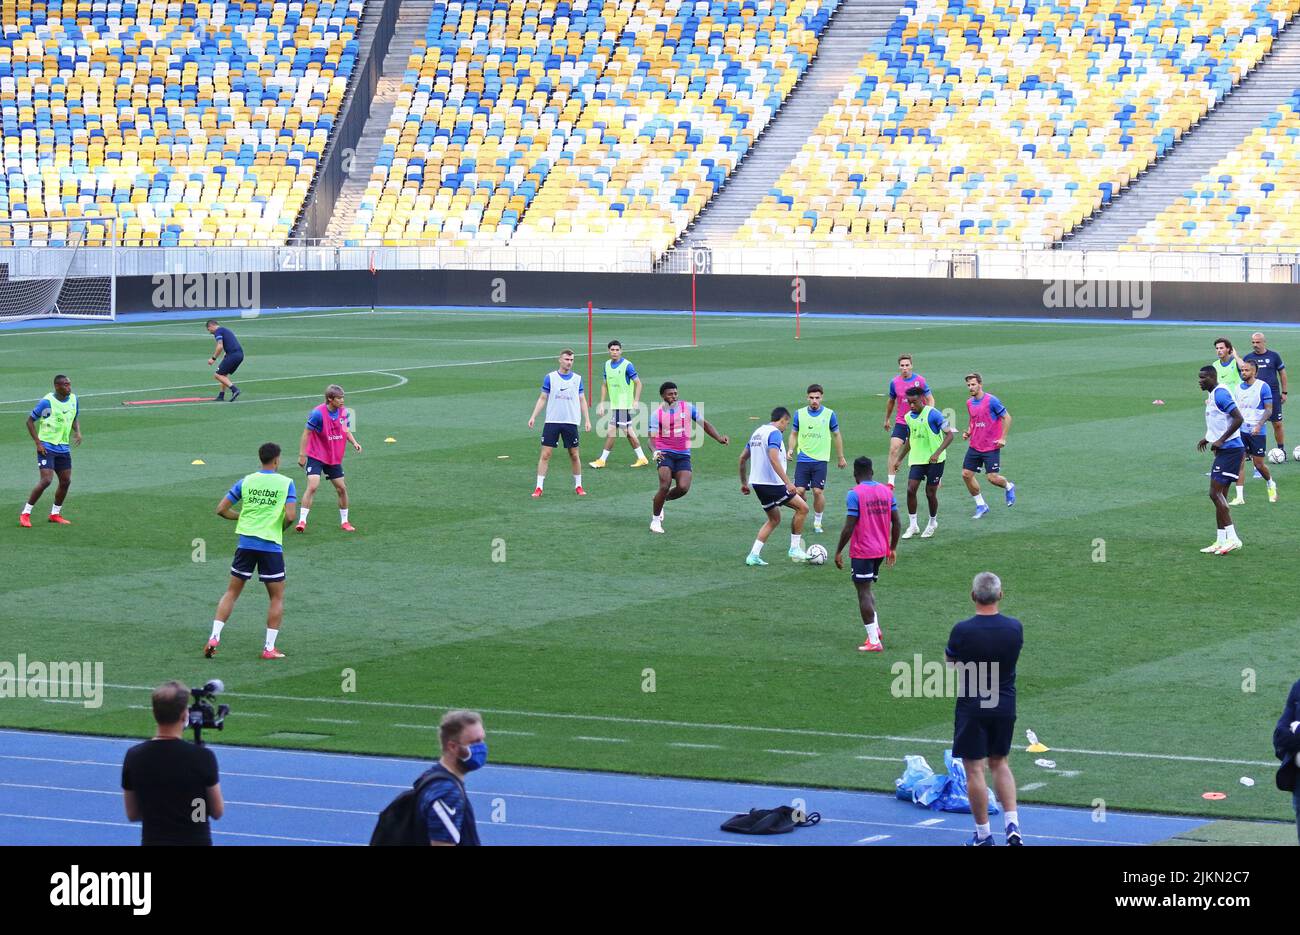 KYIV, UKRAINE - AUGUST 10, 2021: Genk players run during open training session before the UEFA Champions League third qualifying round game against Shakhtar Donetsk in Kyiv Stock Photo